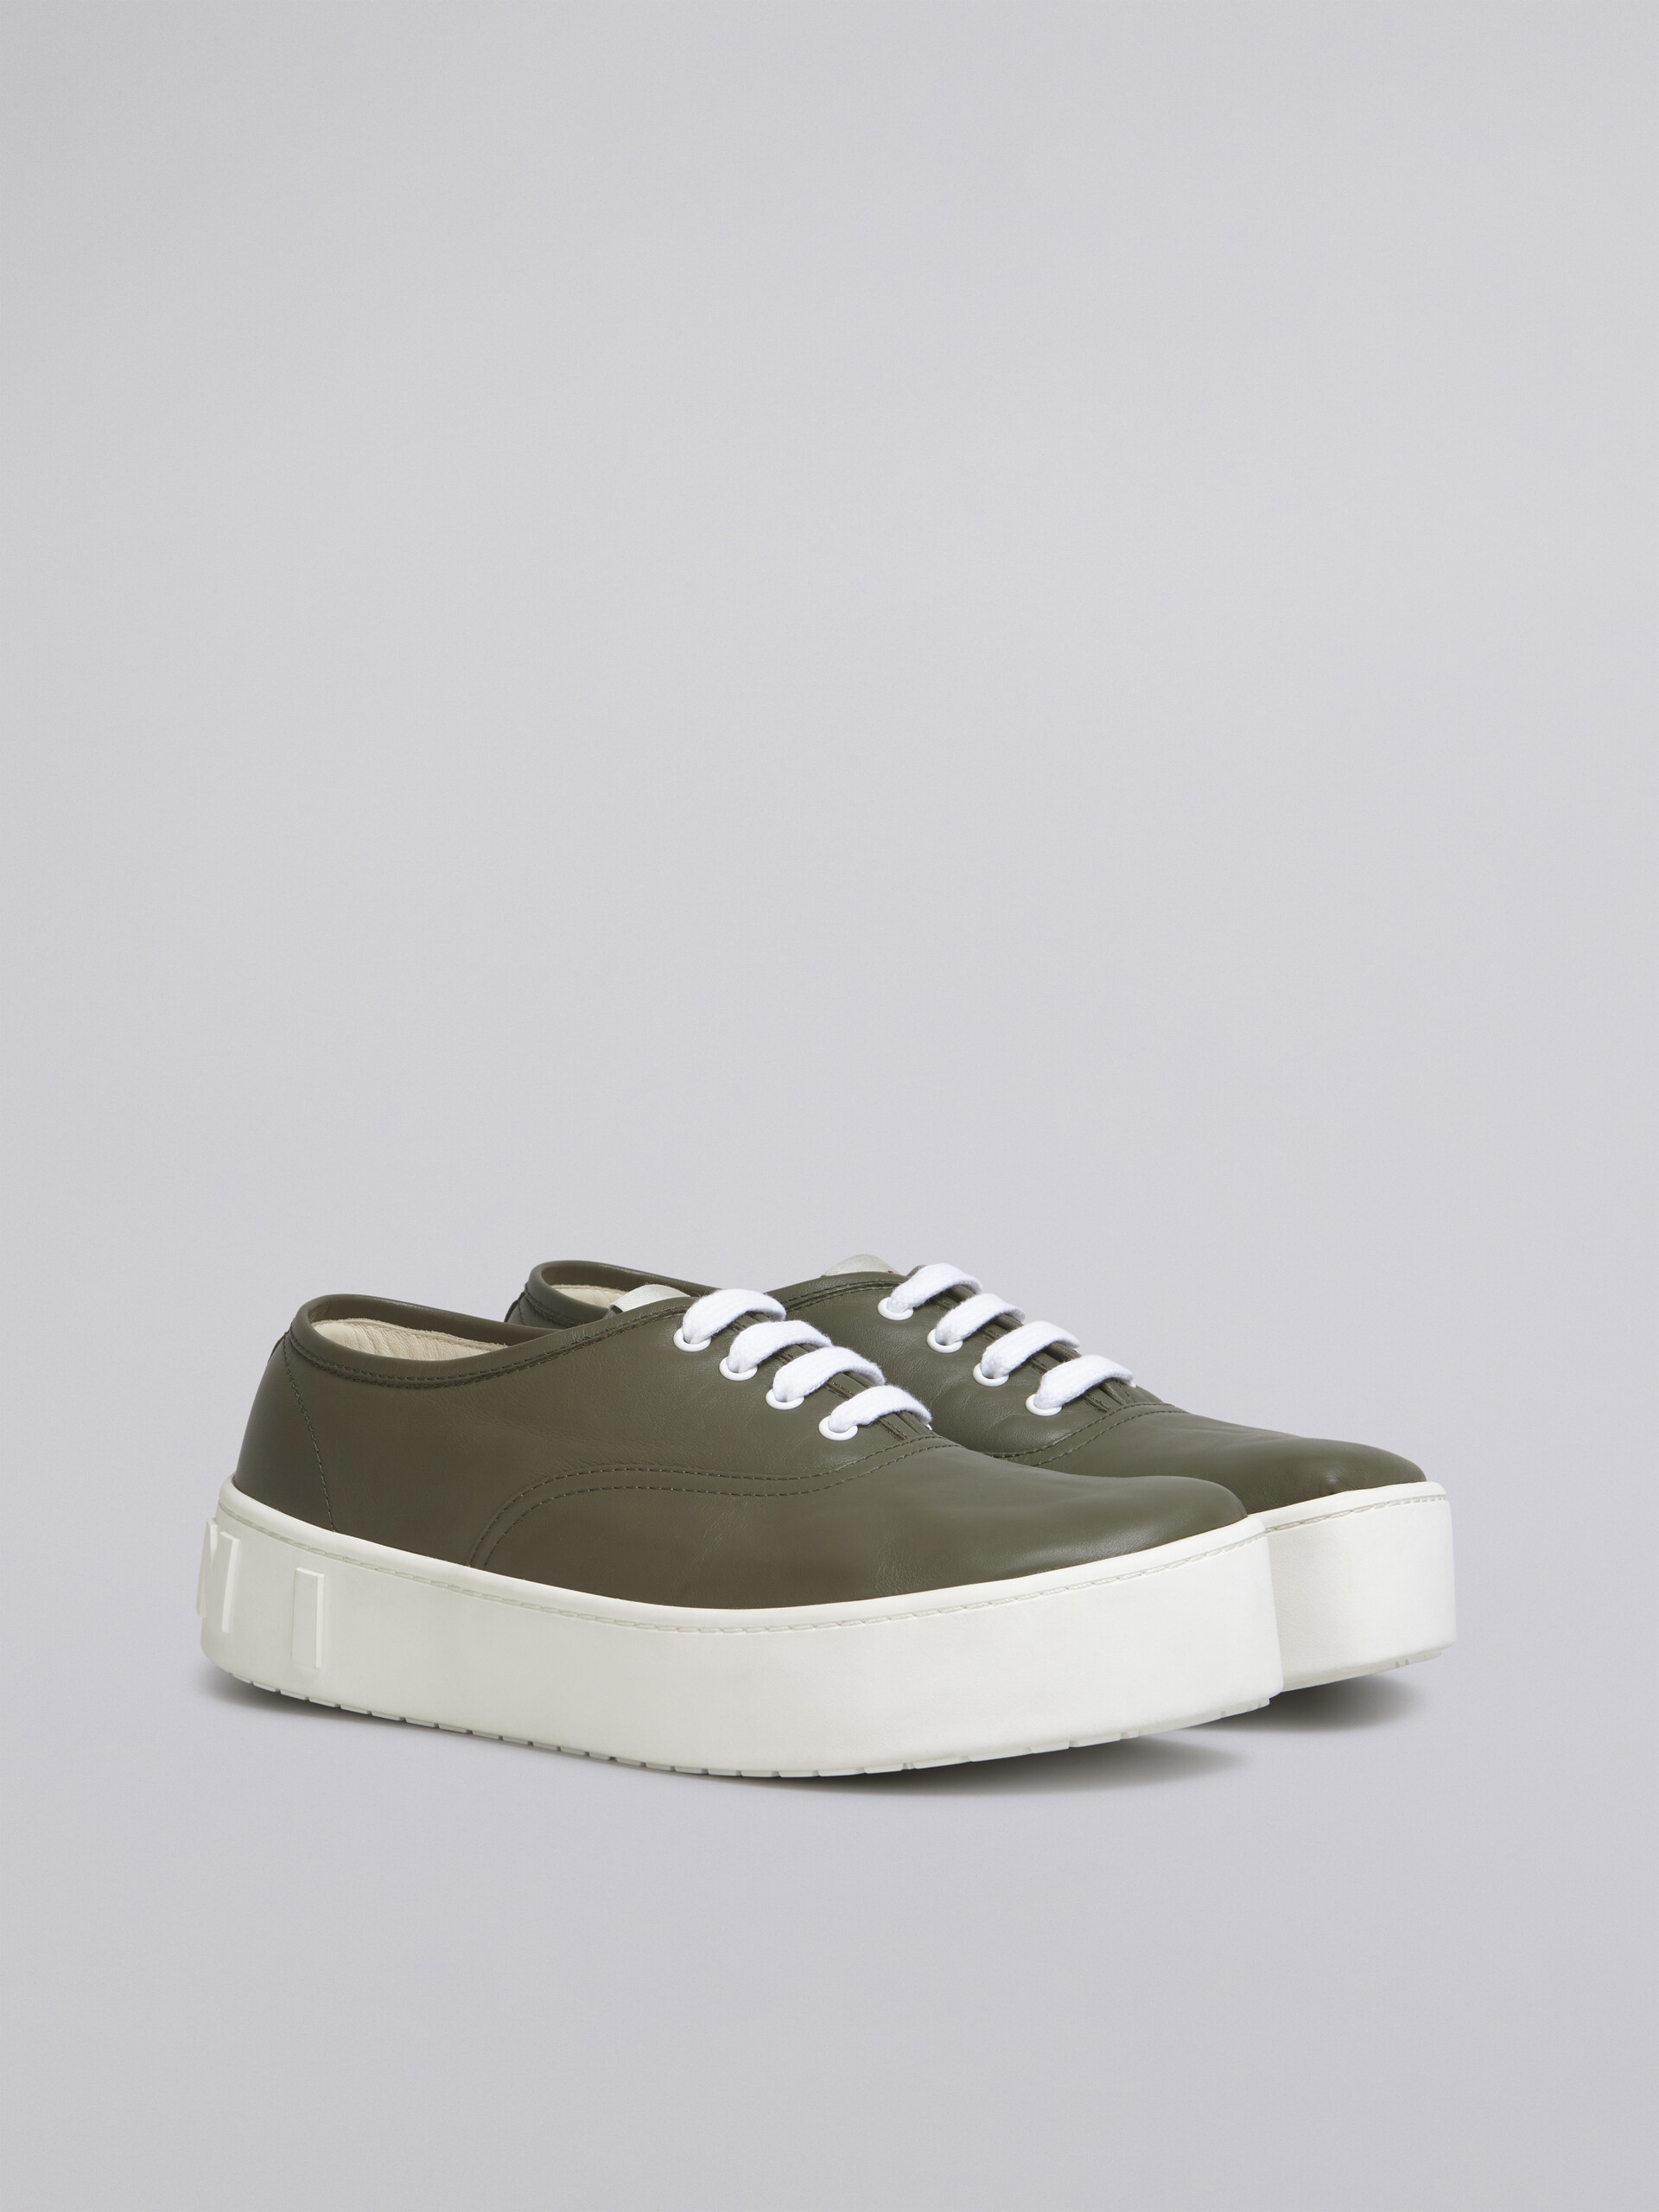 Green leather sneaker with maxi logo - Sneakers - Image 2